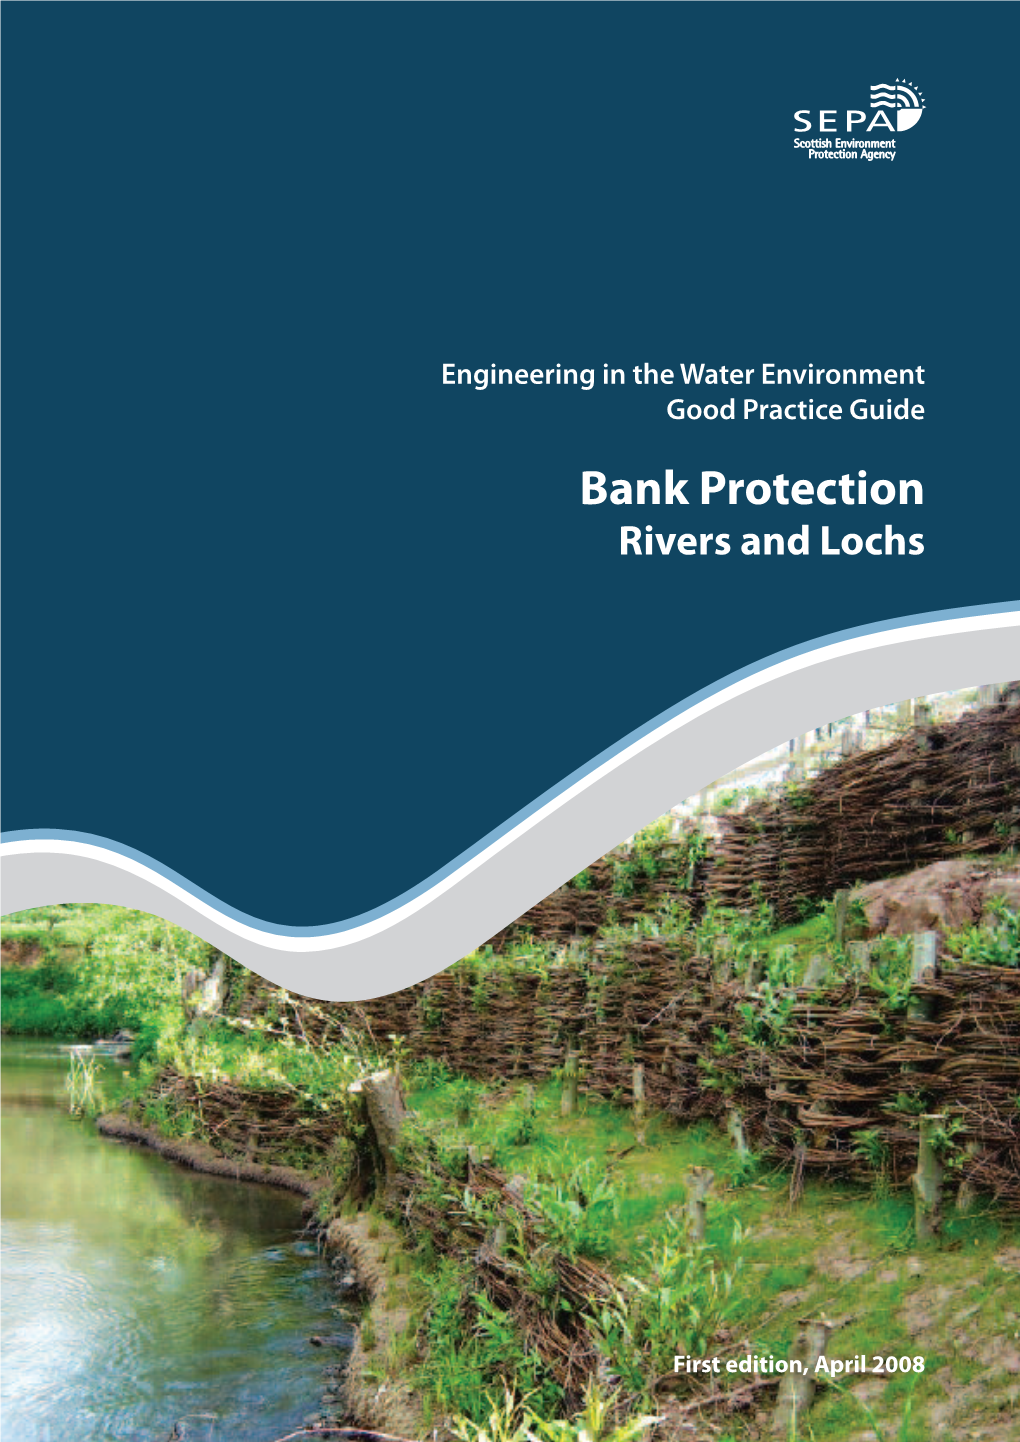 Bank Protection Rivers and Lochs